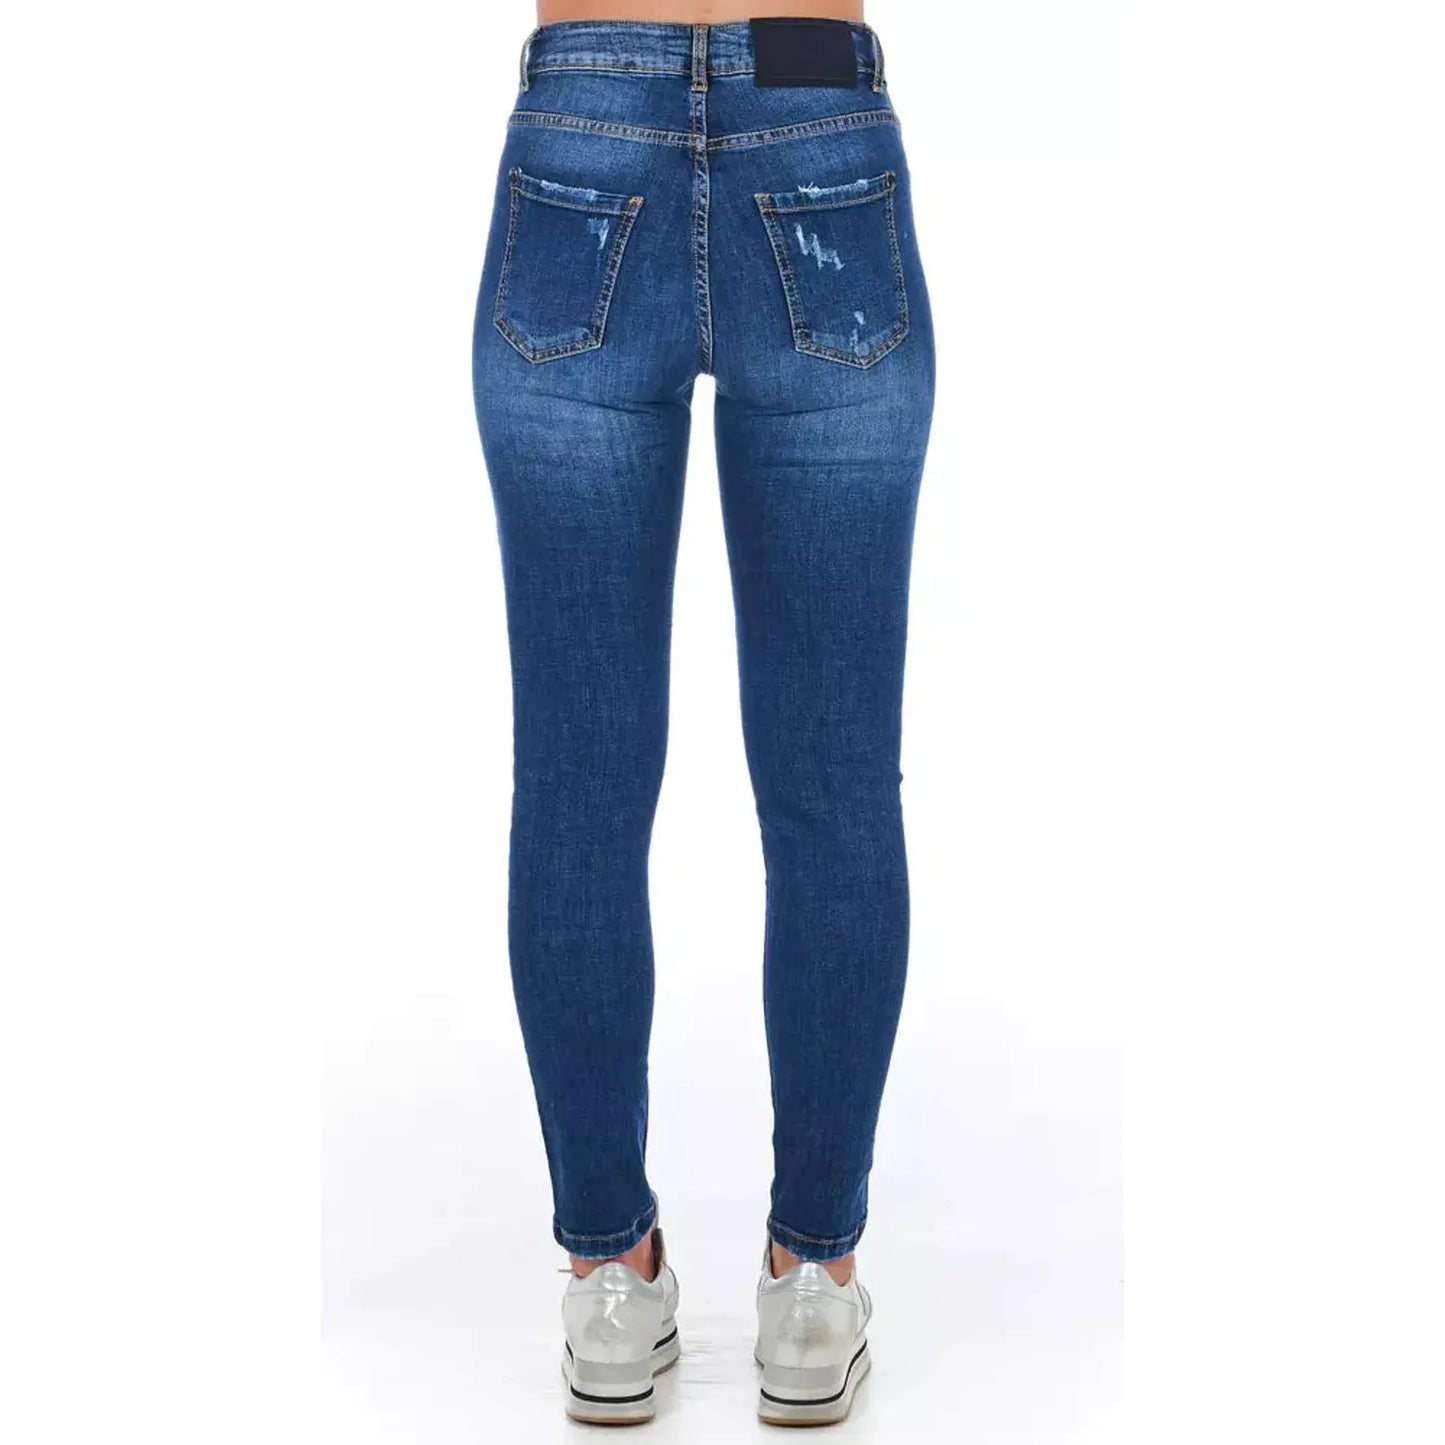 Frankie Morello Chic Worn Wash Denim Jeans for Sophisticated Style blue-jeans-pant-5 stock_product_image_21771_1014168414-24-b412b831-da5.webp